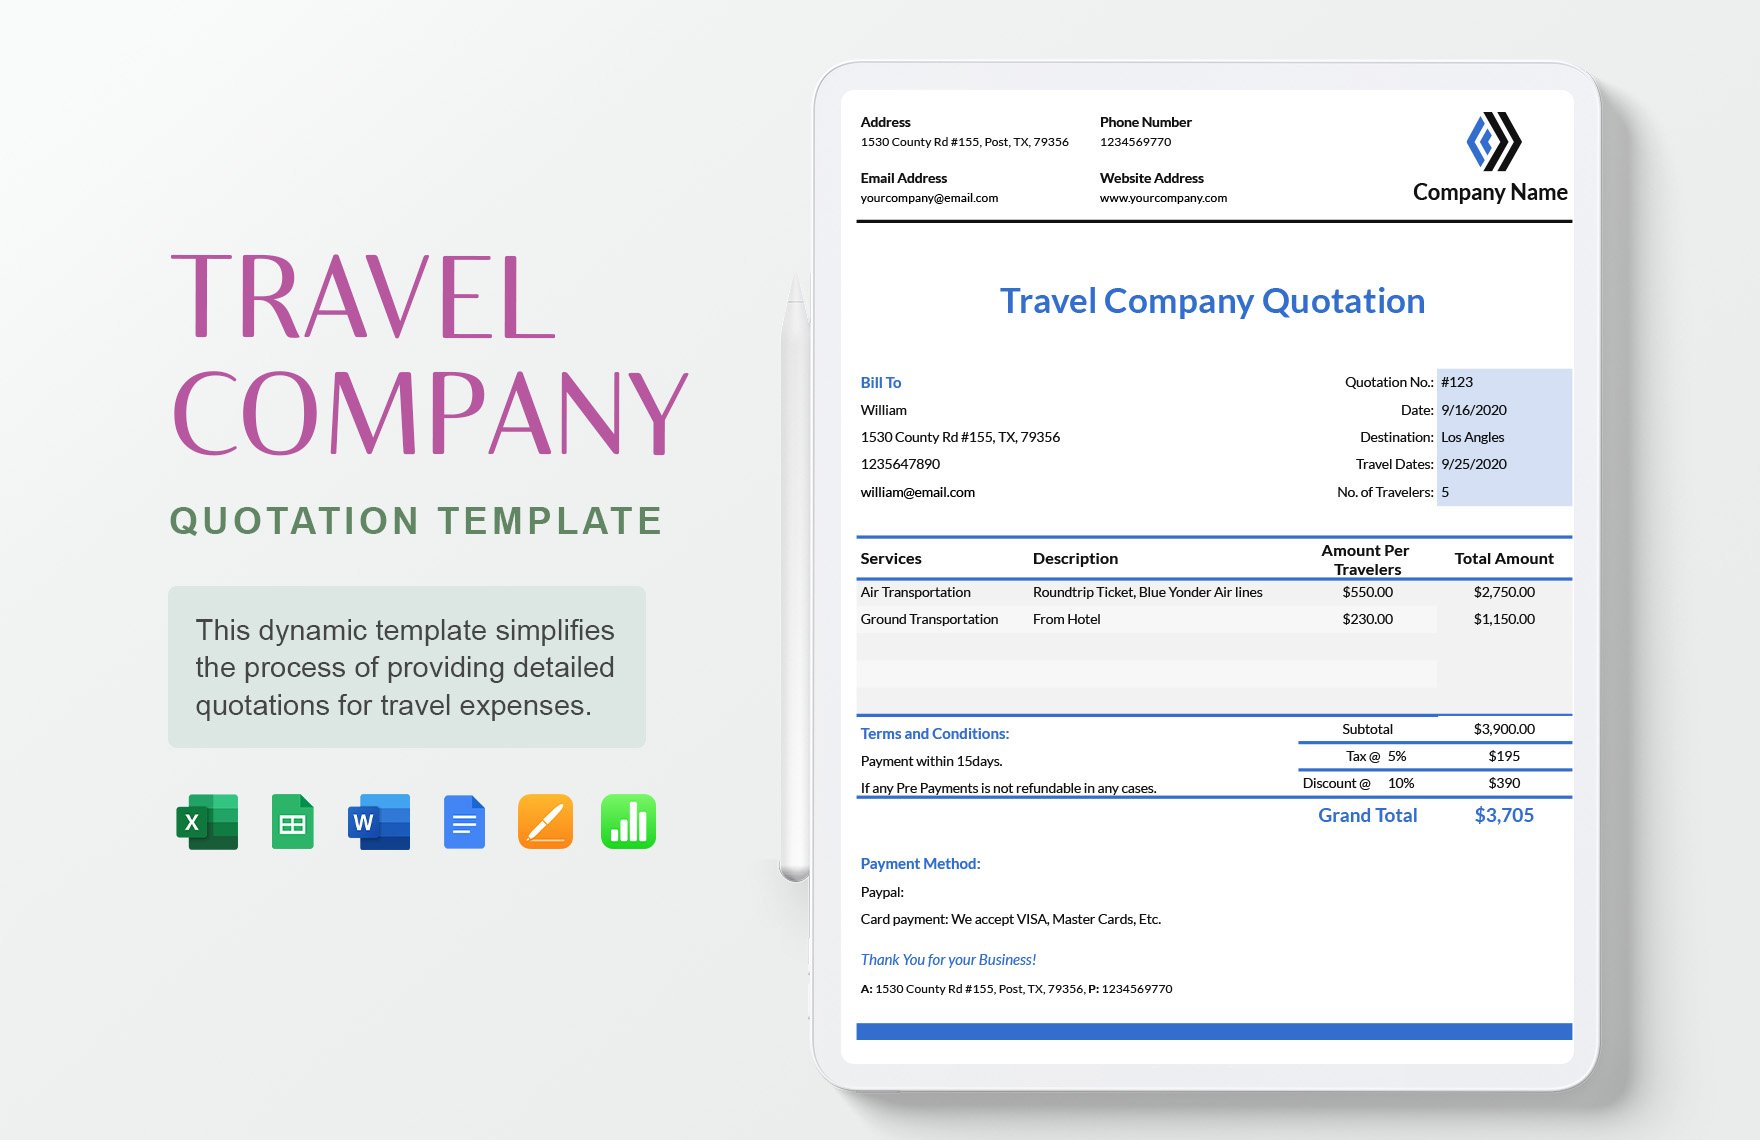 Travel Company Quotation Template